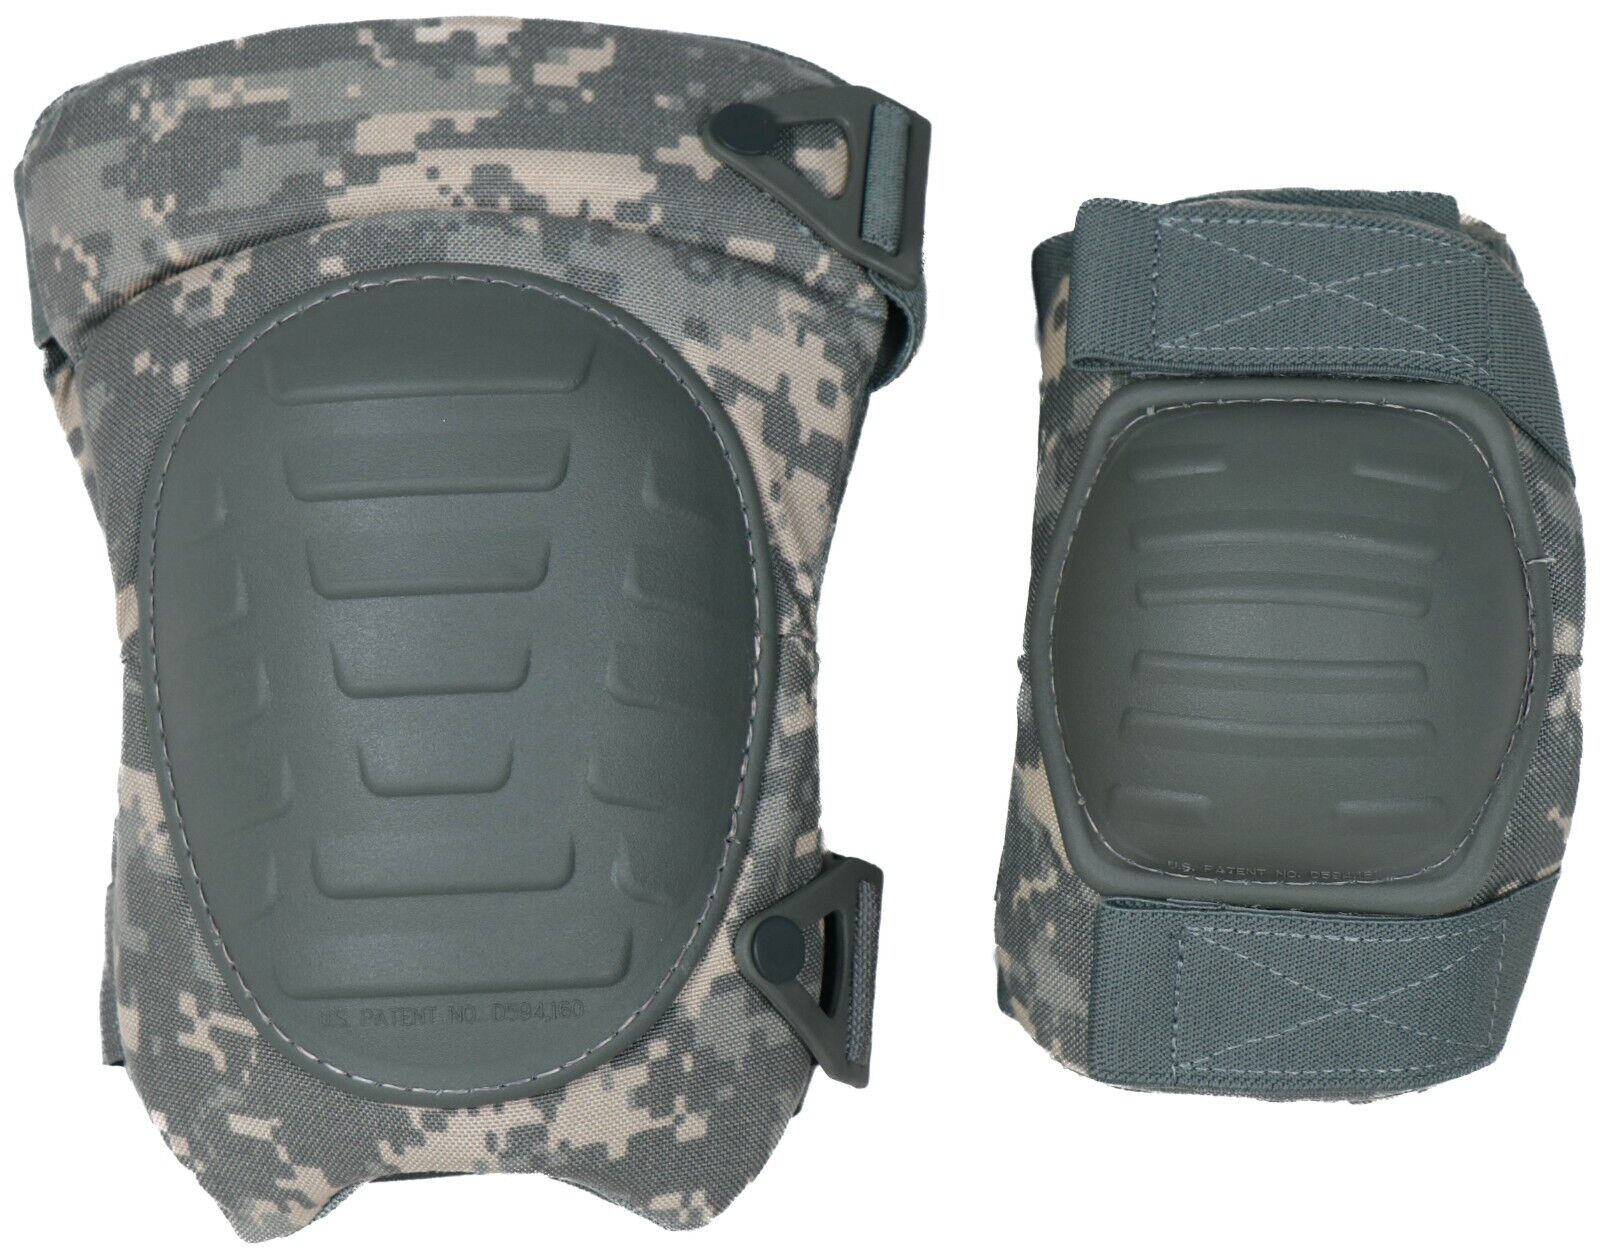 NEW US Army McGuire Nicholas Extended Knee and Elbow Pad Set ACU UCP Military